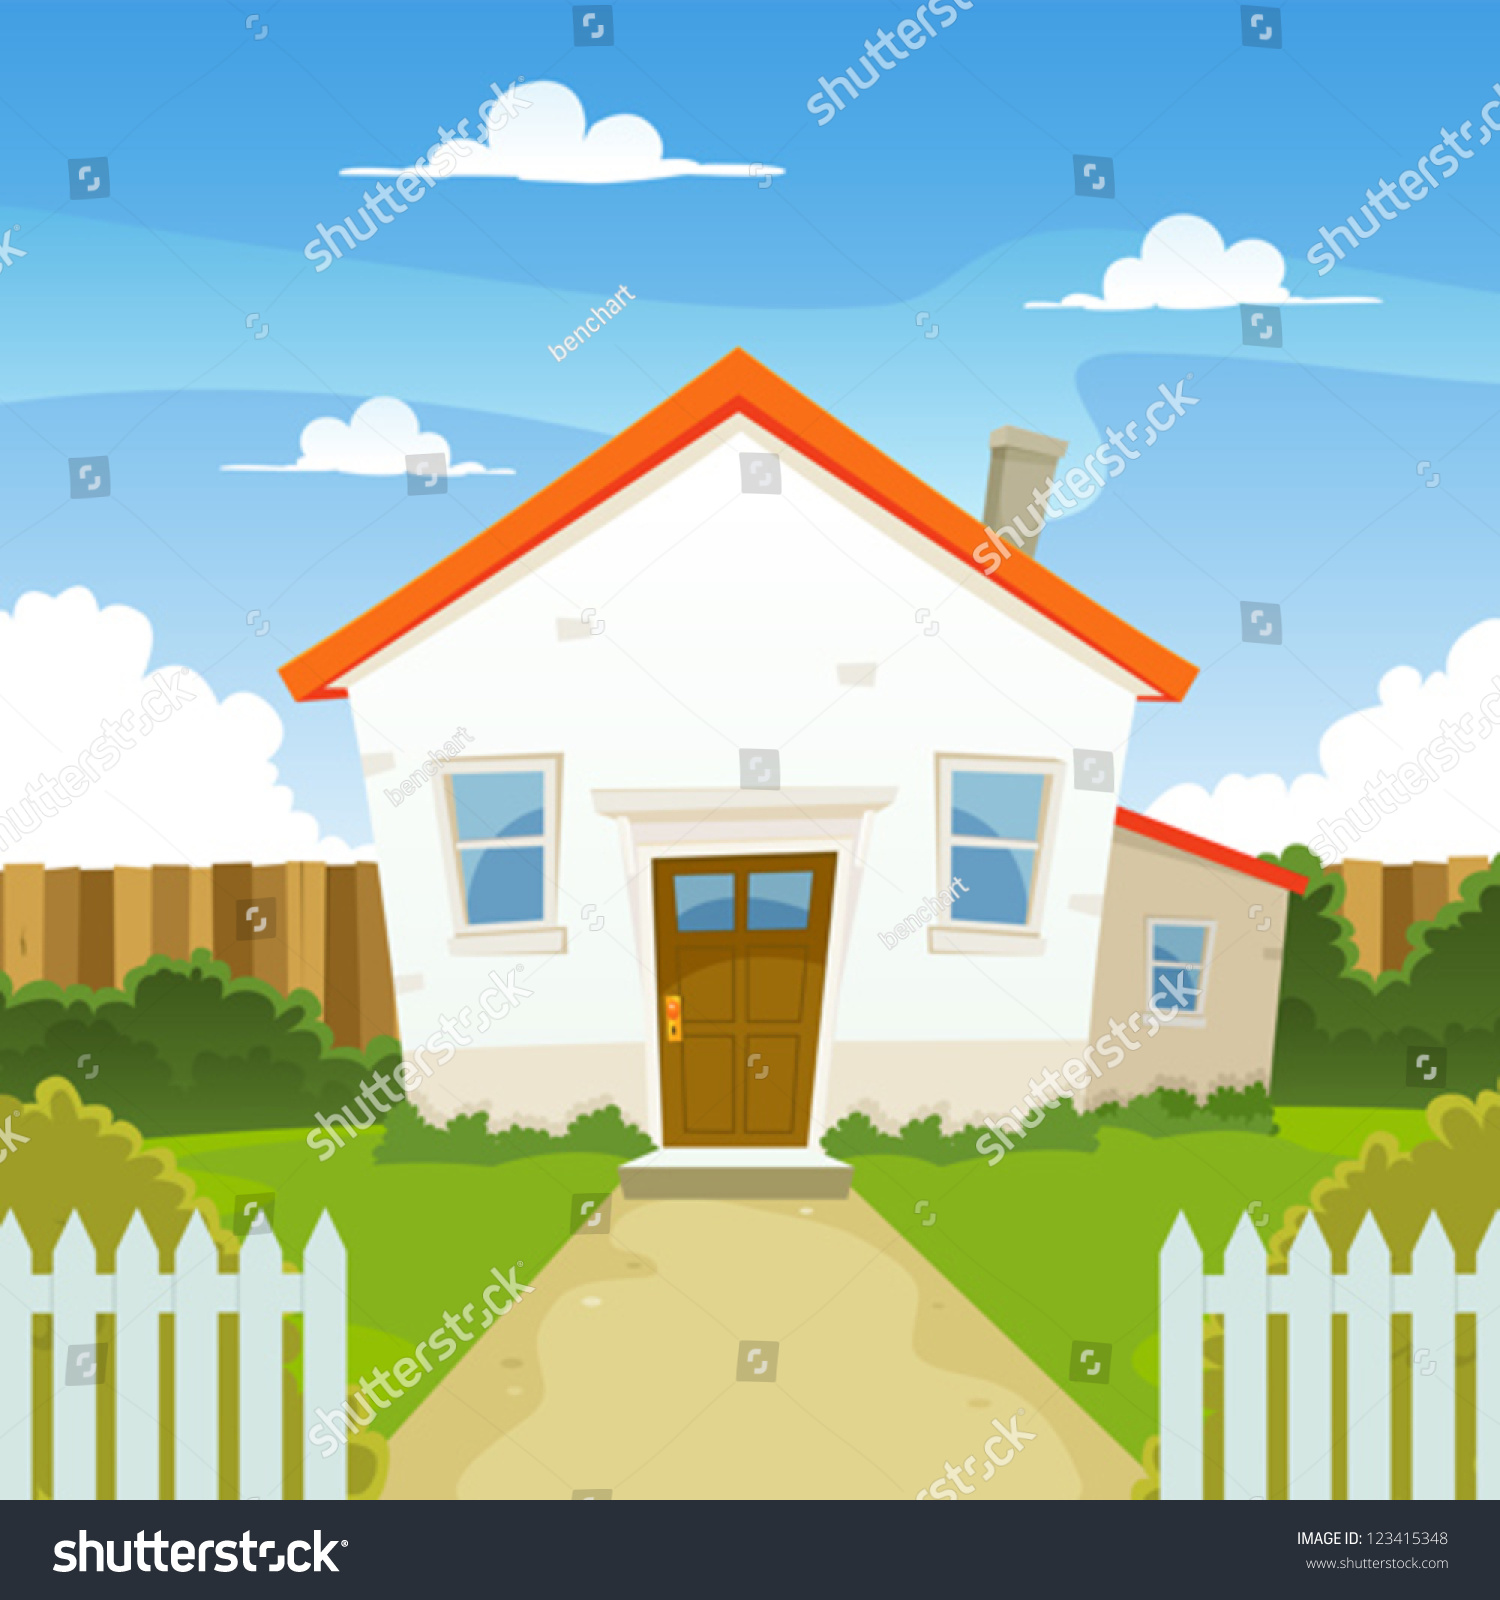 clipart of house with garden - photo #39